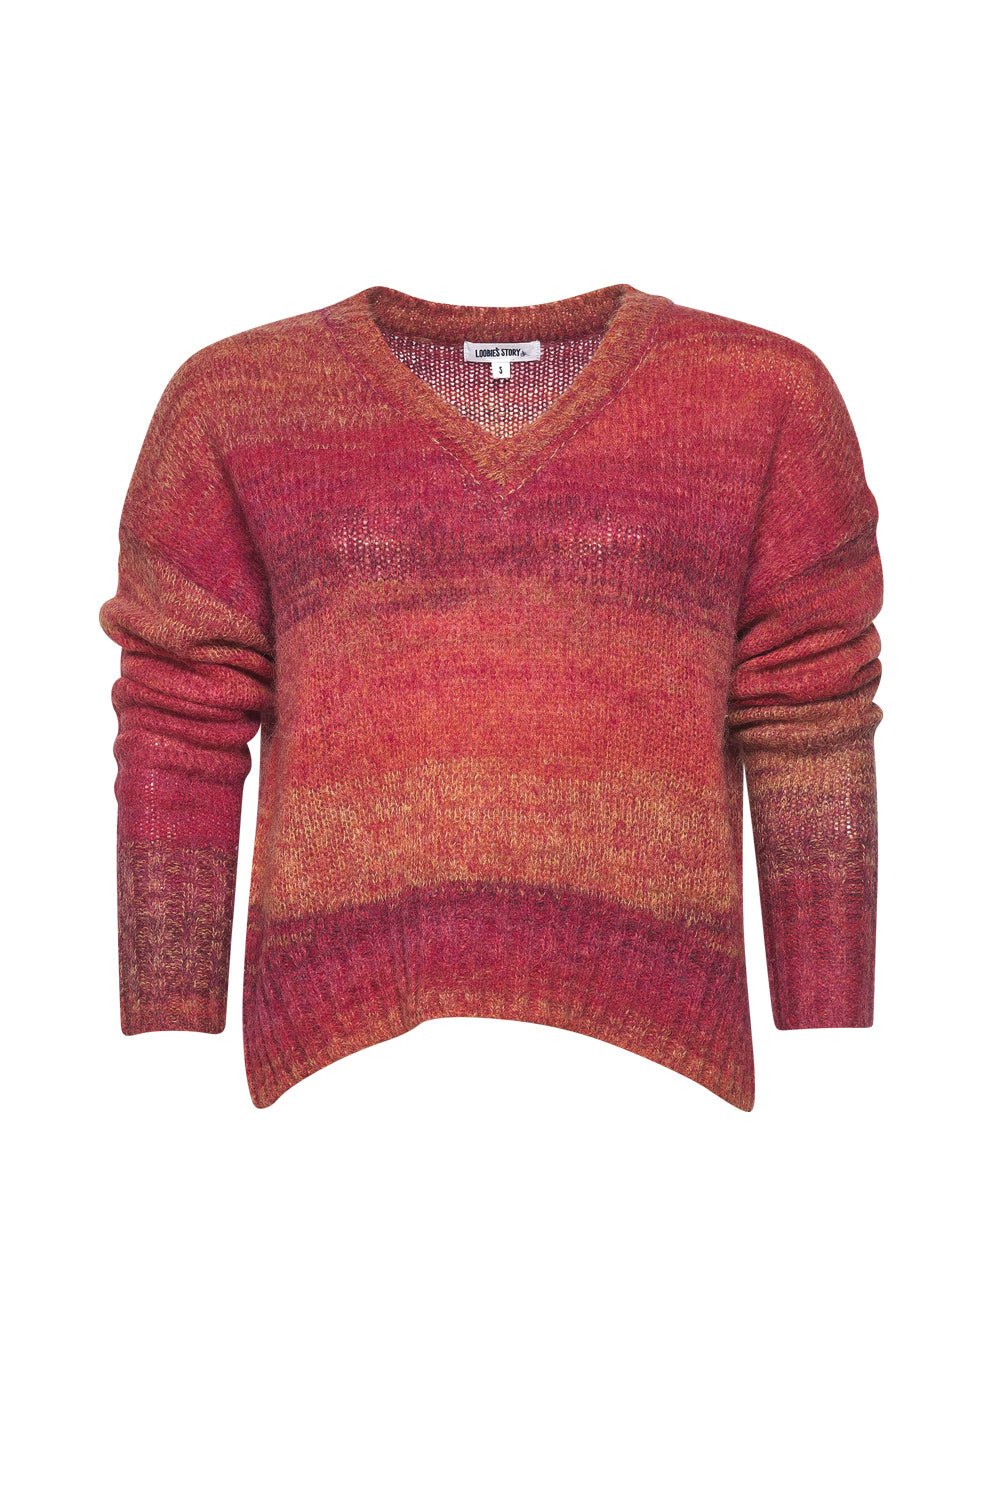 Shop Dietrich Sweater| Flame Ombre - Loobies Story